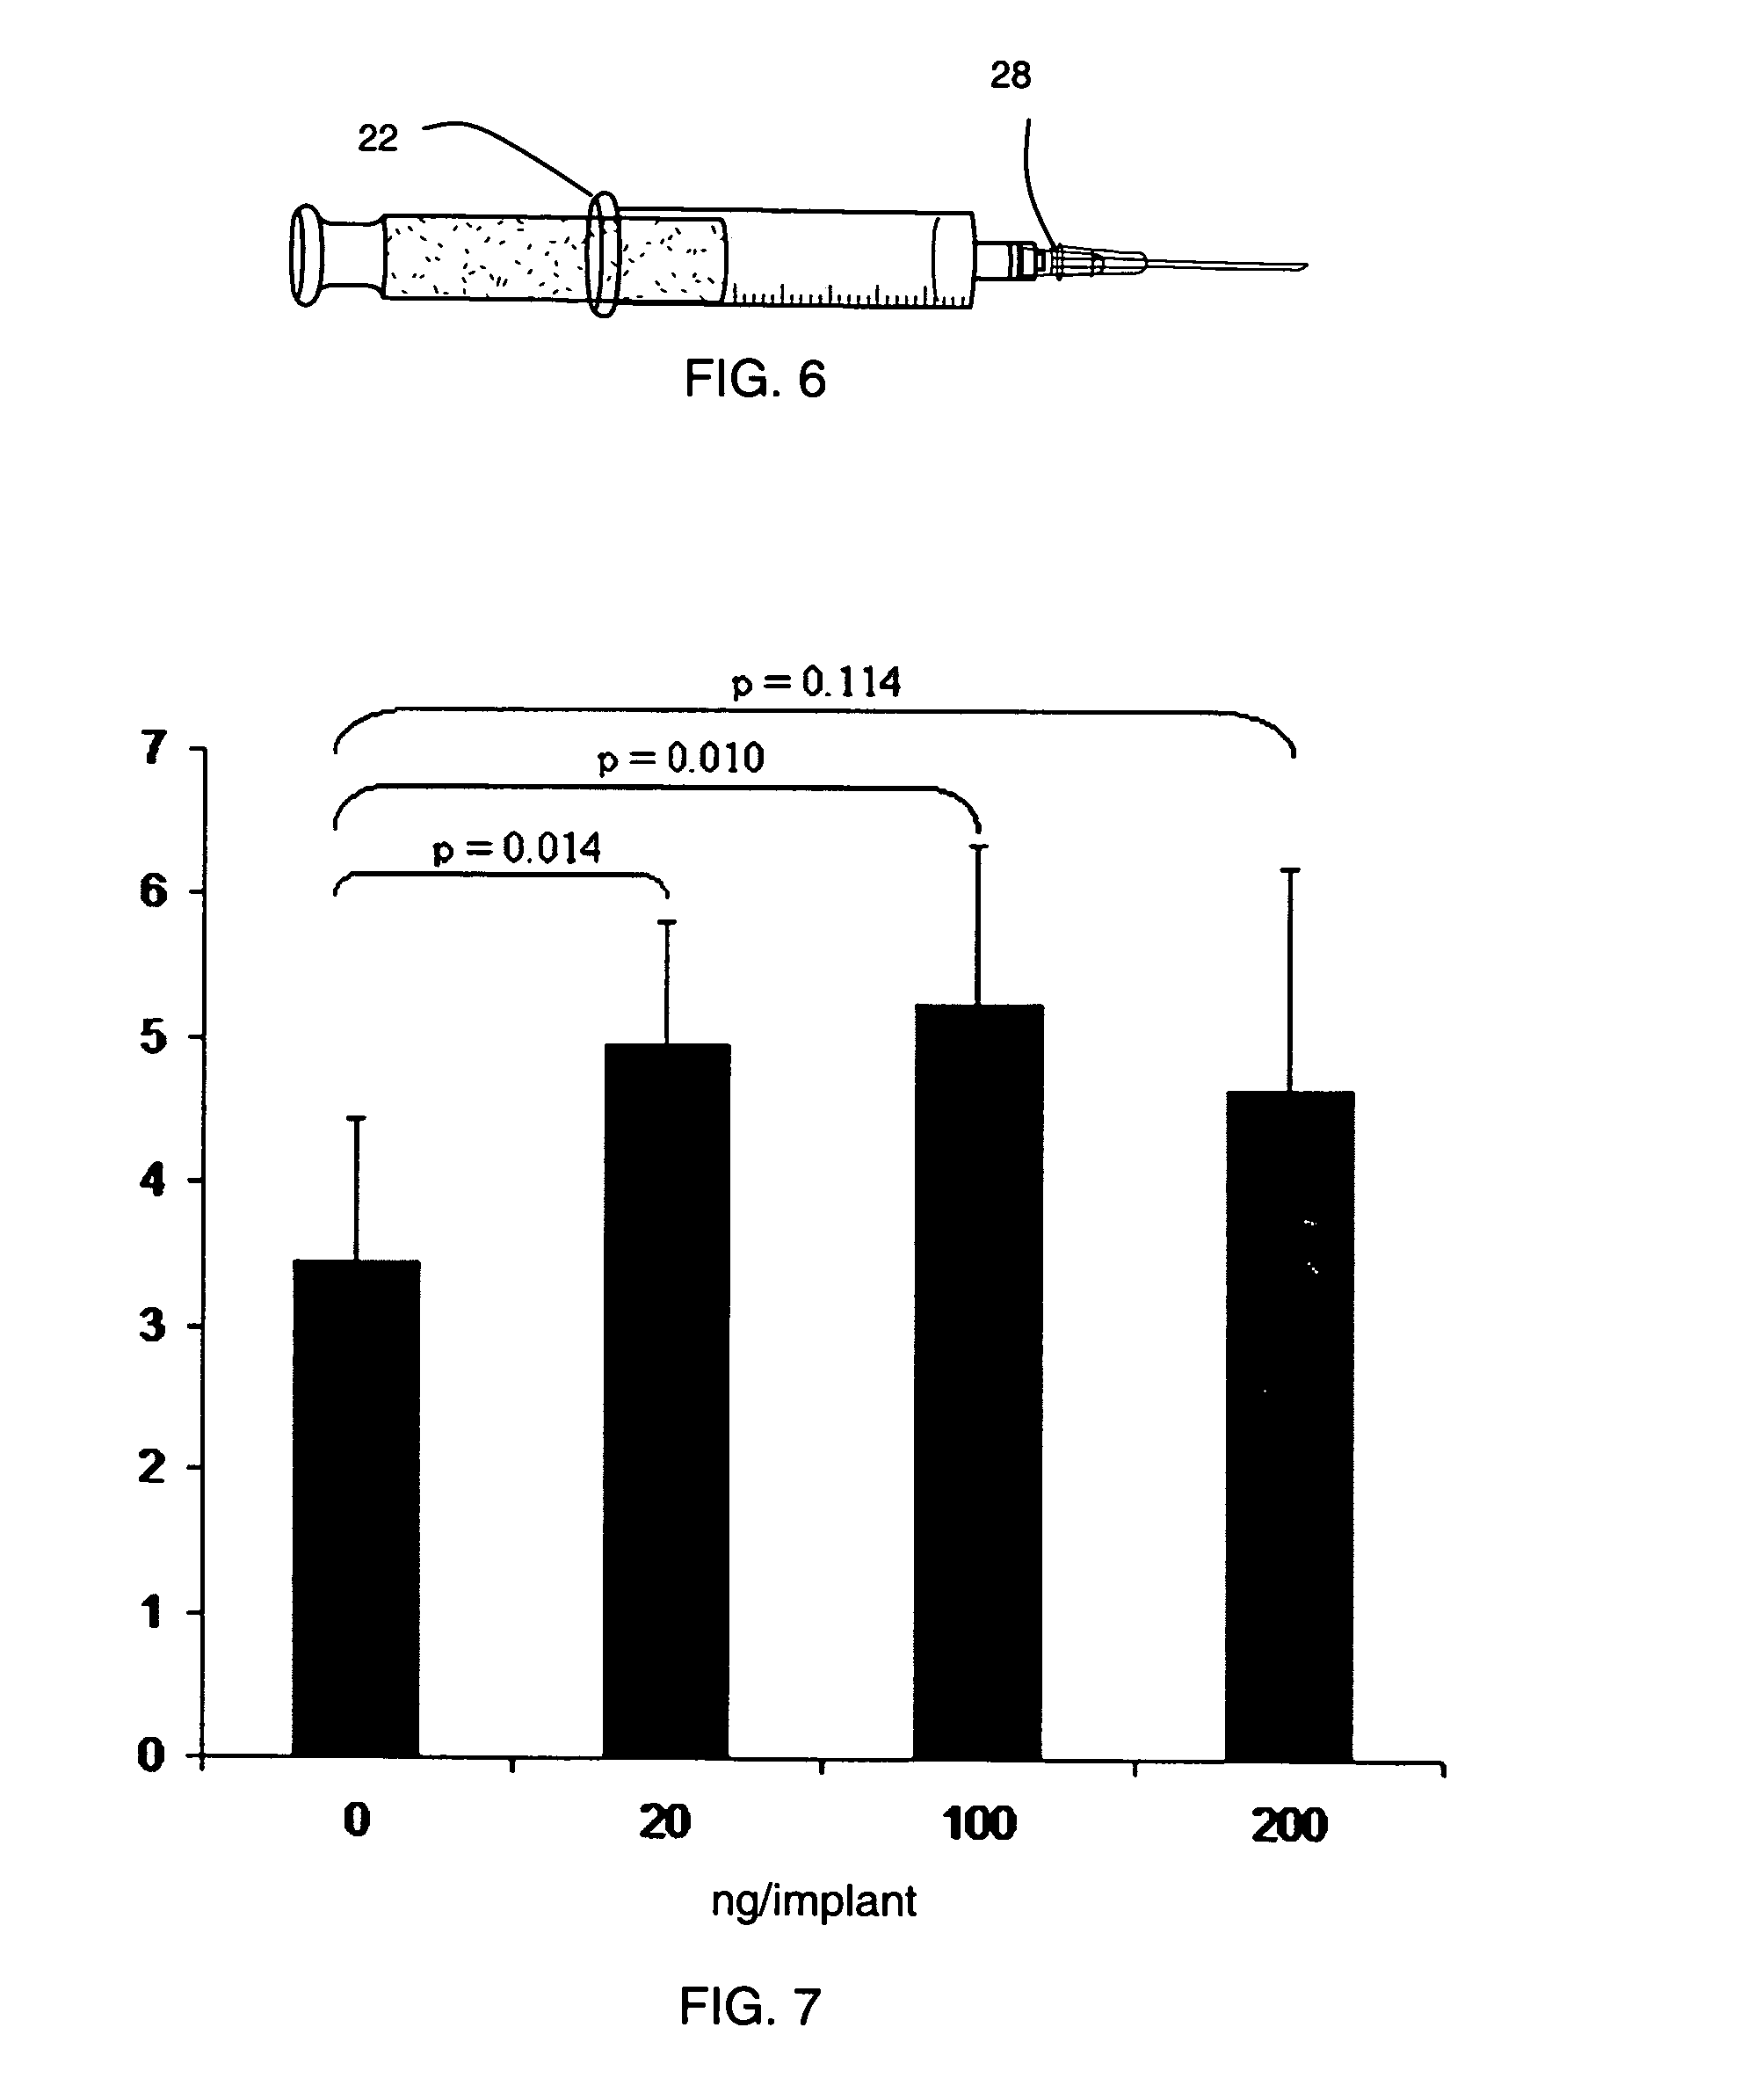 Formulations and methods for delivery of growth factor analogs